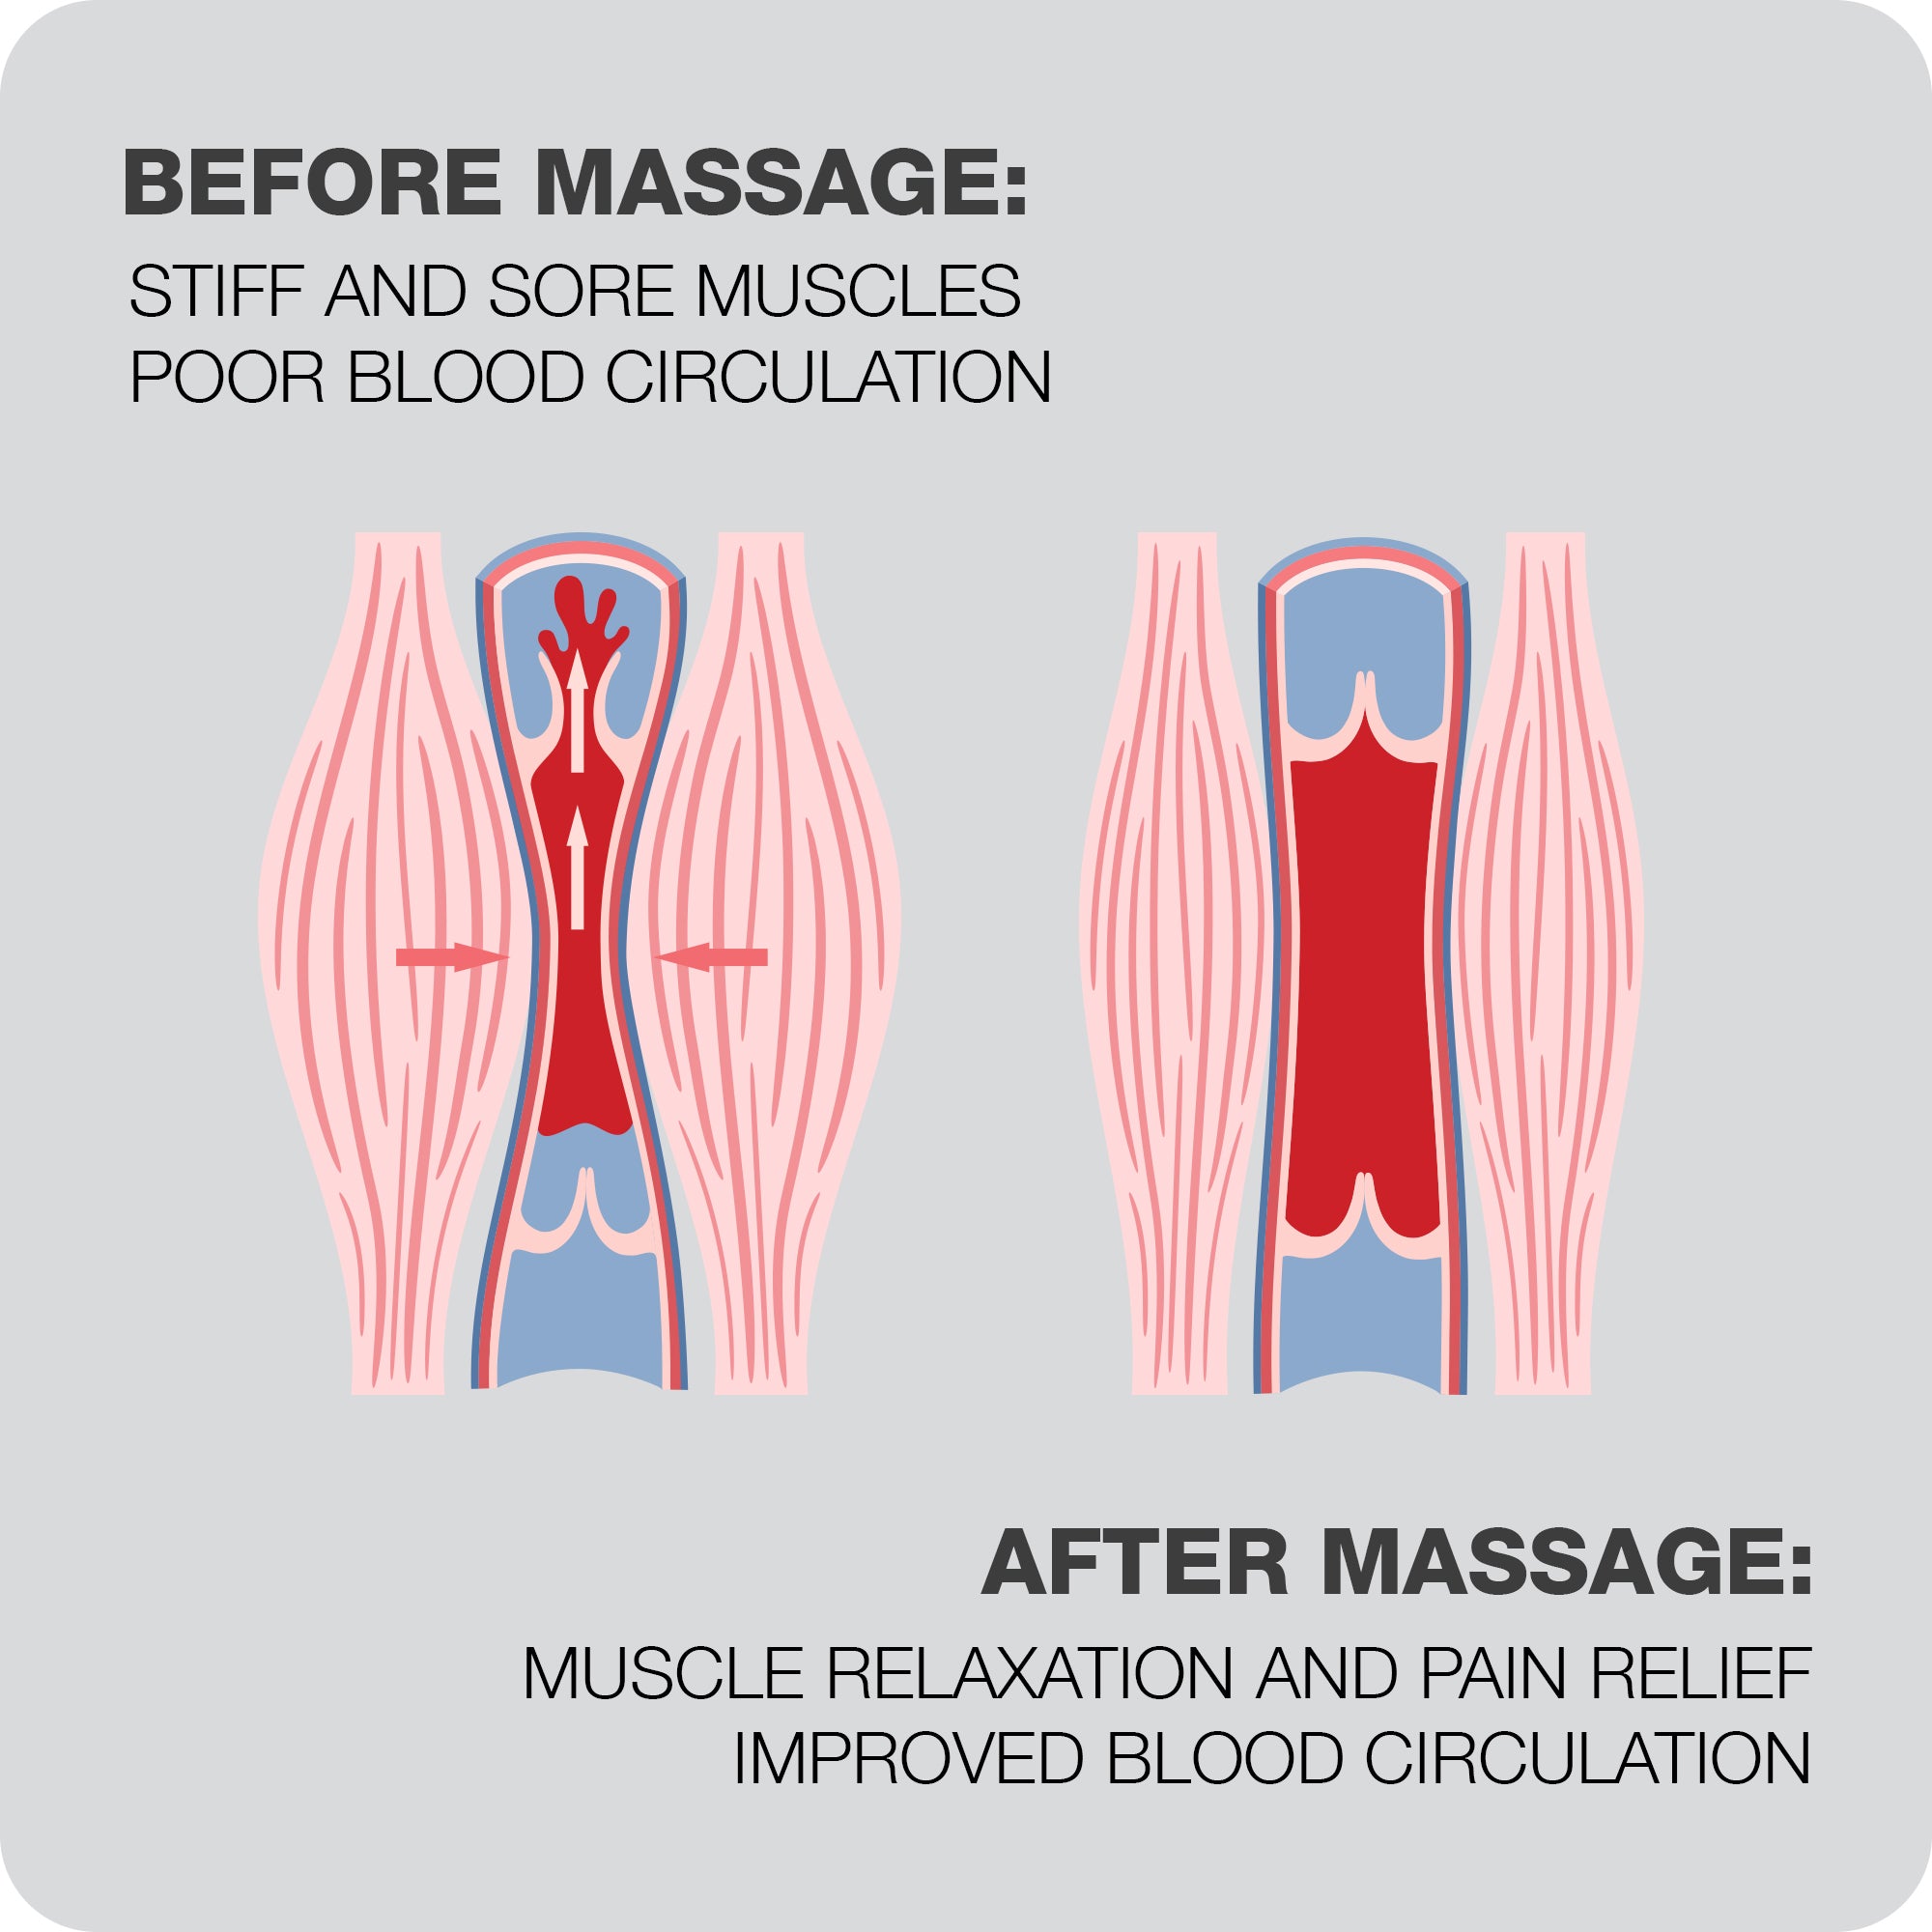 comparison of muscle tissue: before and after massage